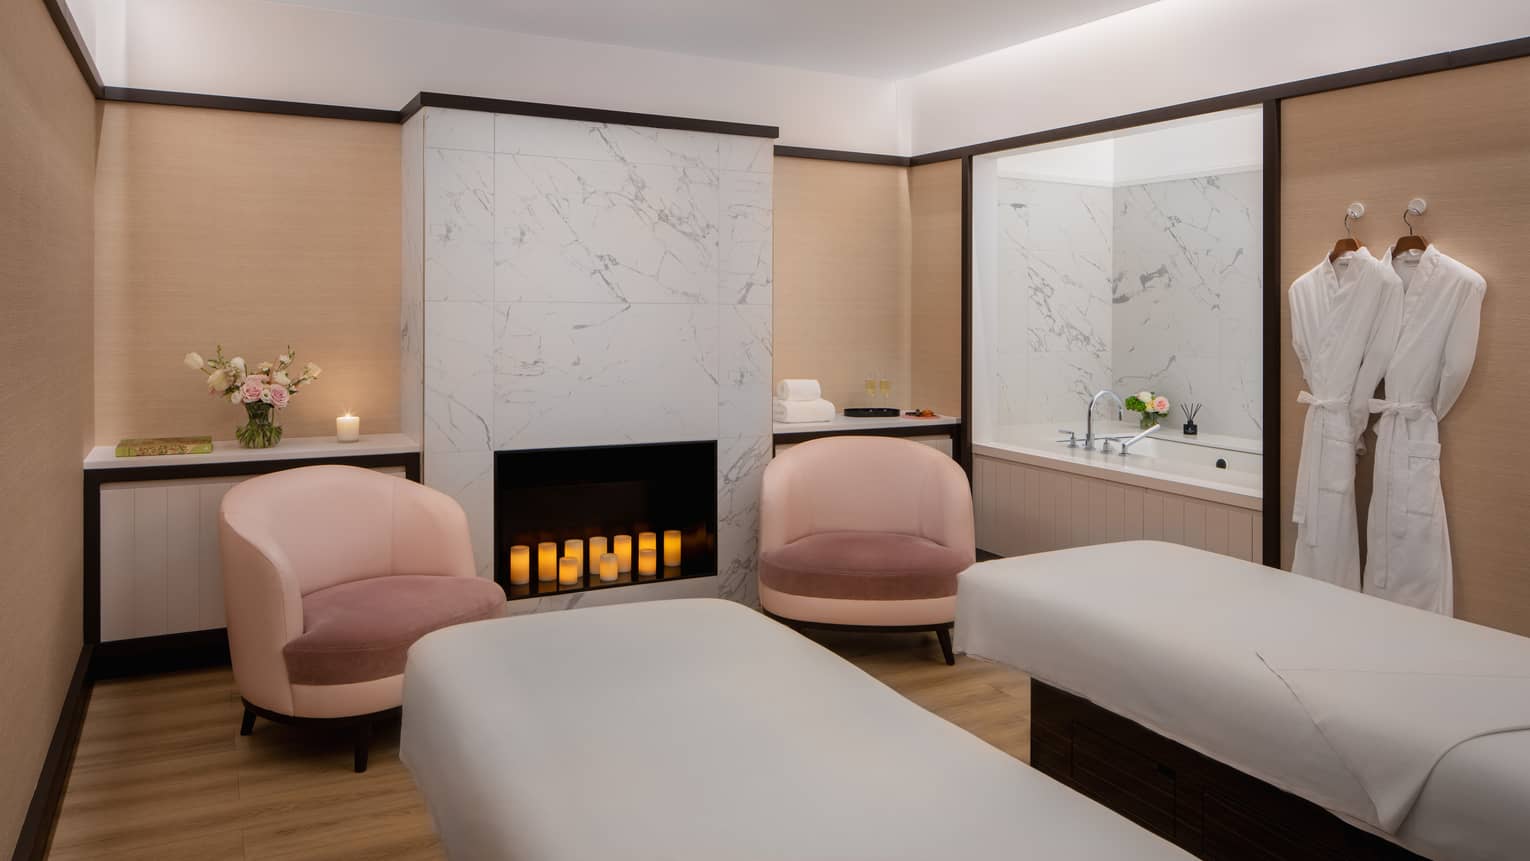 Couple's spa suite with a white-tiled fireplace filled with lit candles, an inset bathtub, two pink arm chairs, two side-by-side treatment tables and a pair of white robes